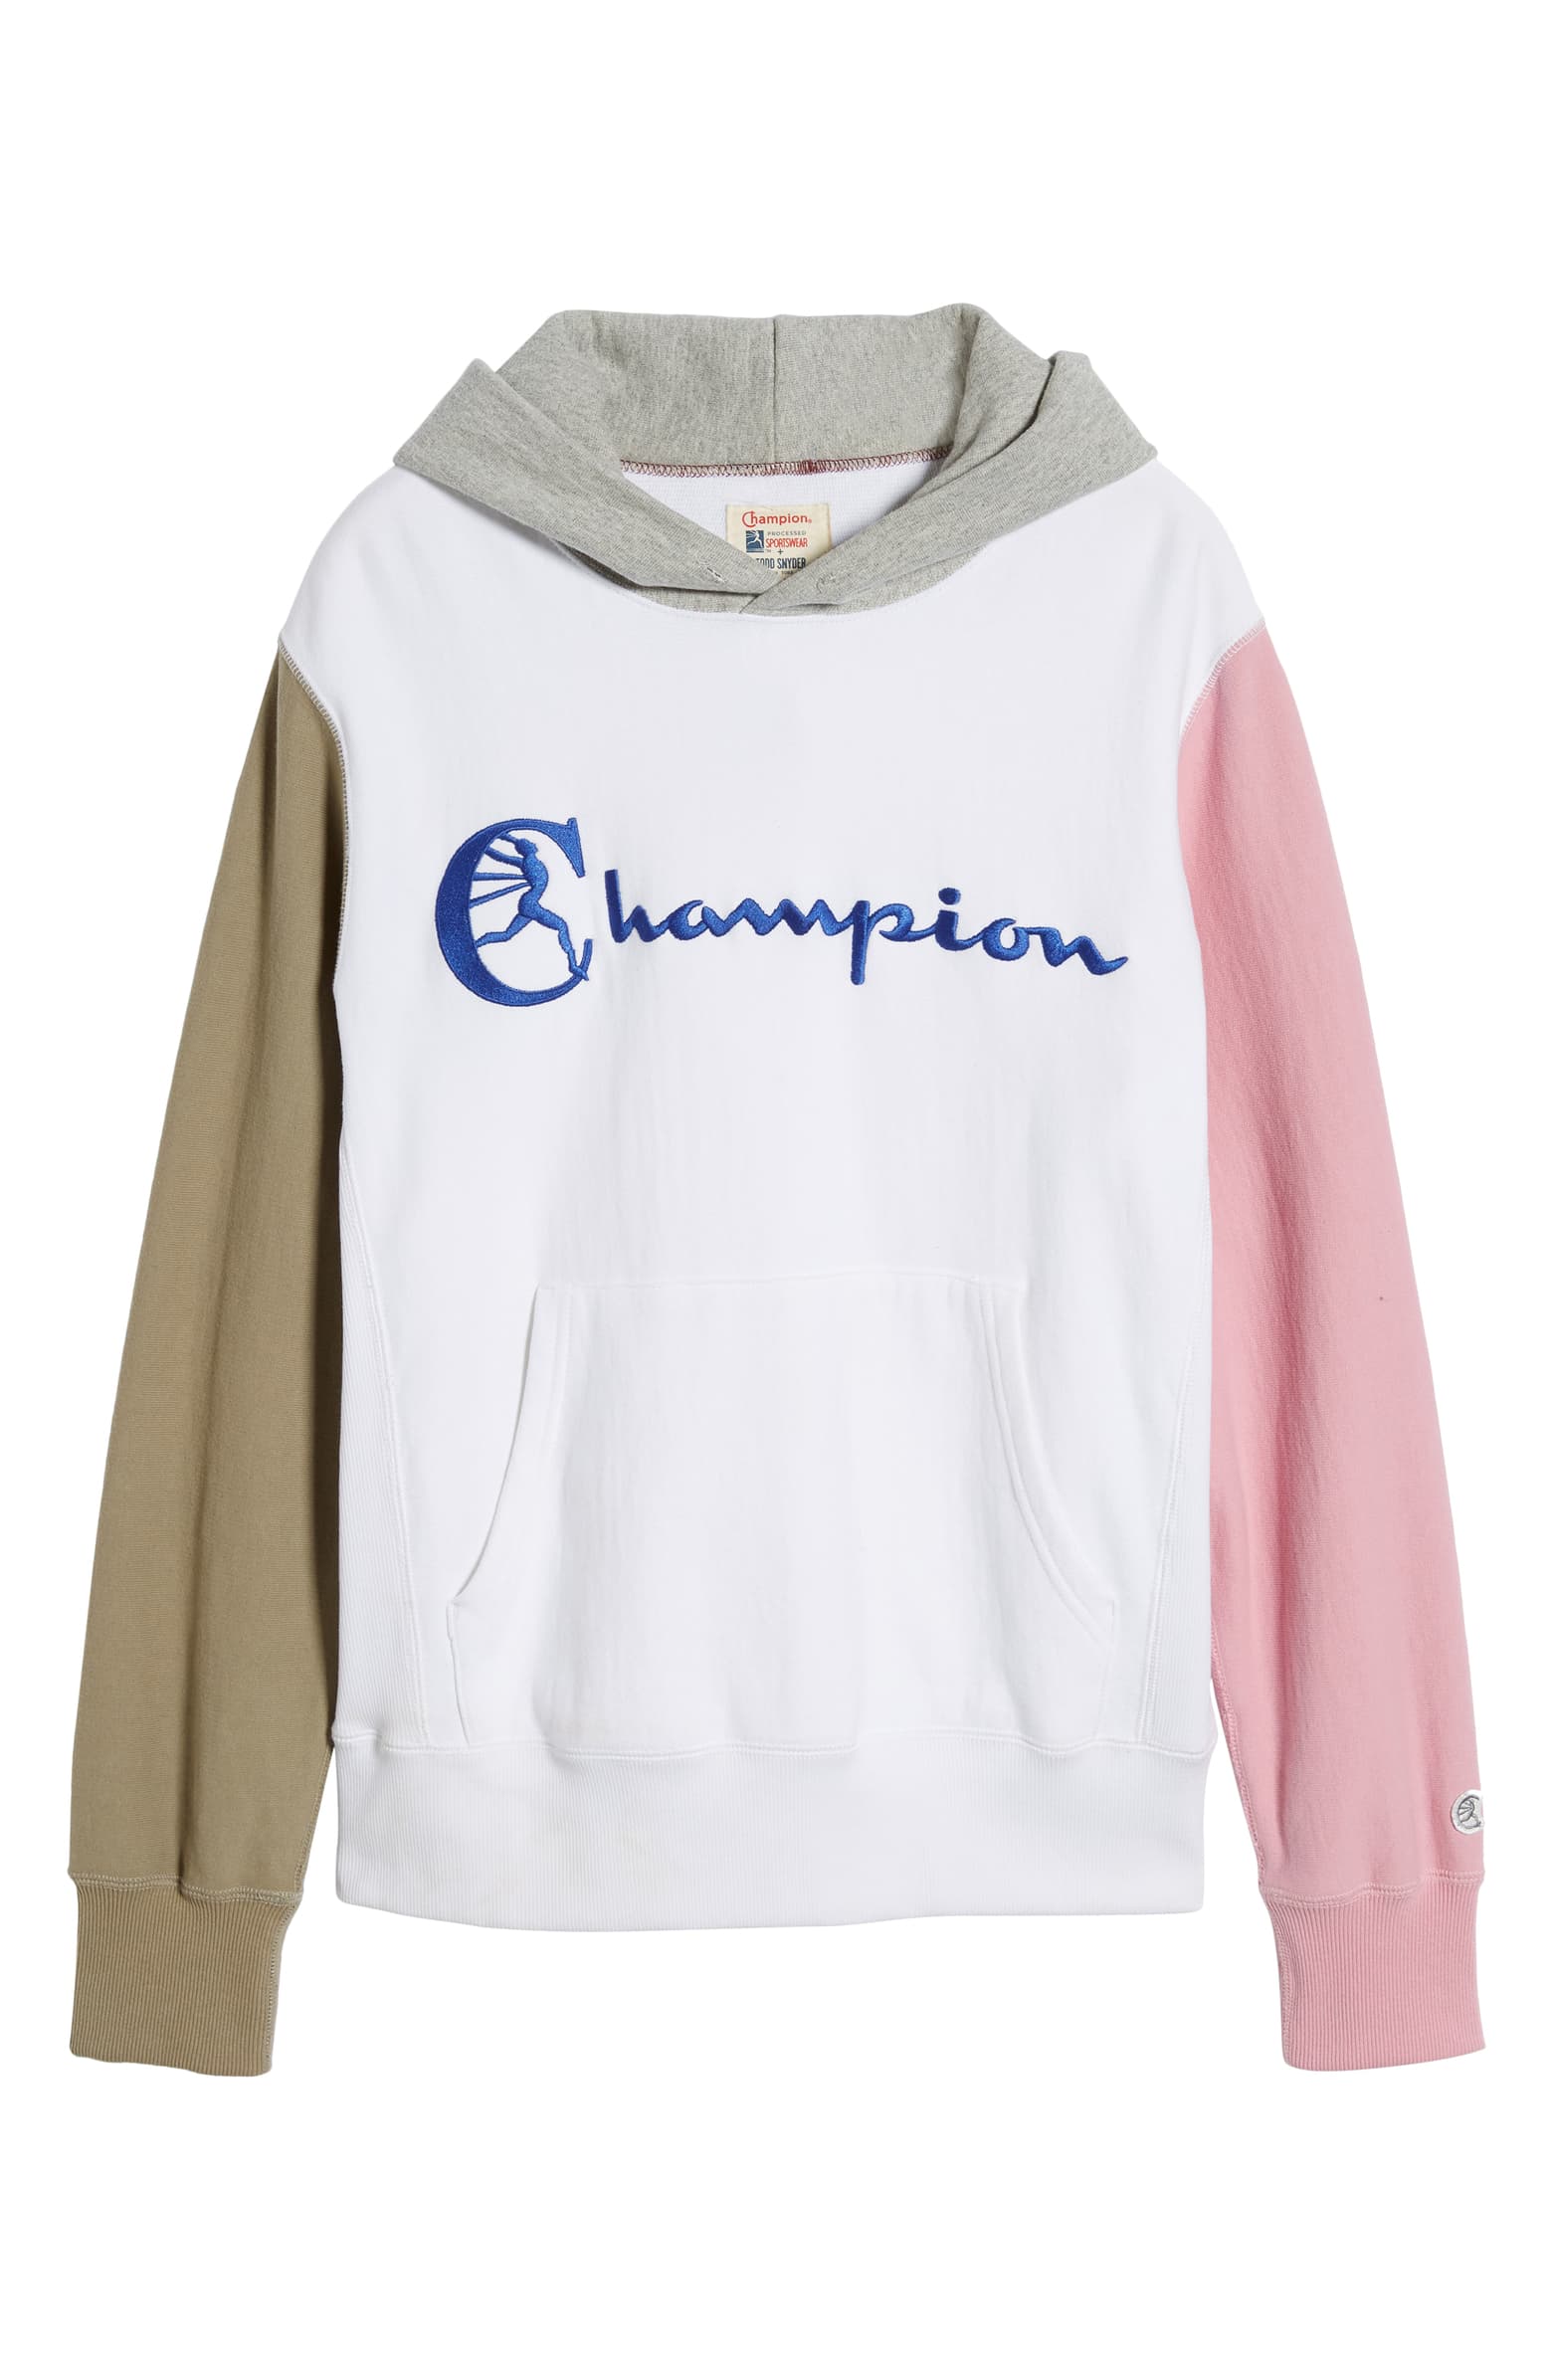 50% OFF the Todd Snyder x Champion 